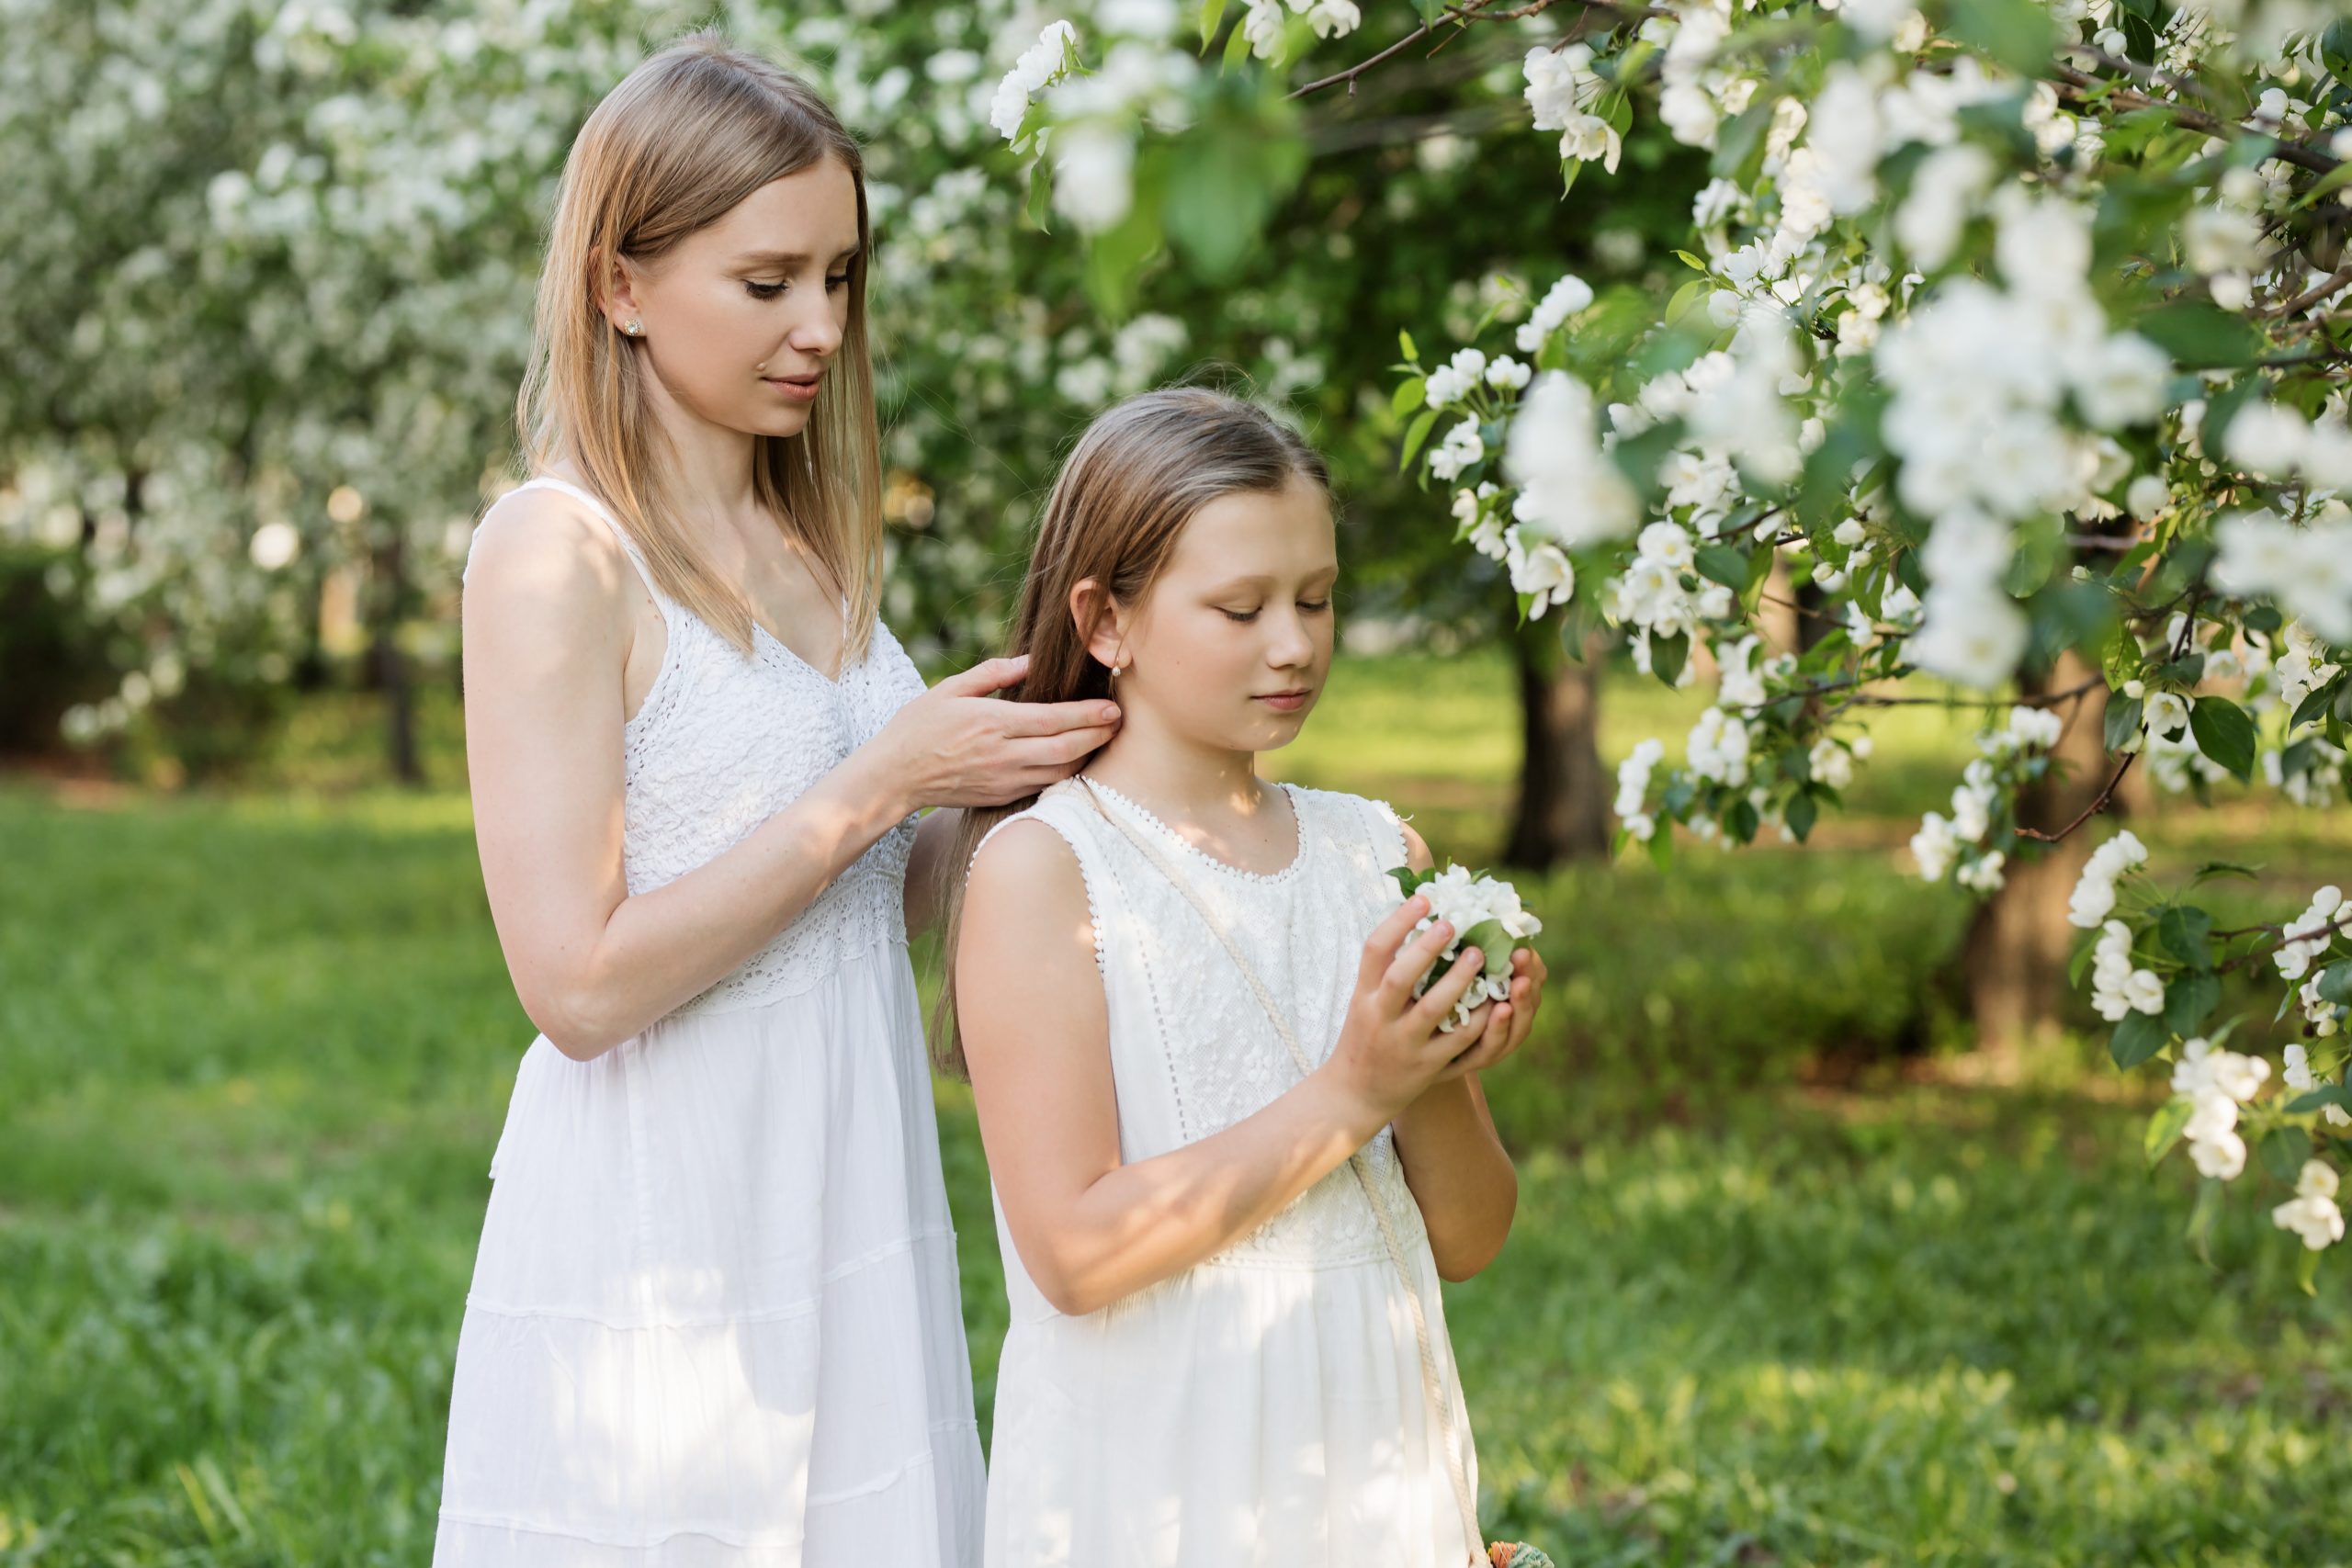 A mother and a daughter are wearing white dresses. The mother is styling the daughter's hair.